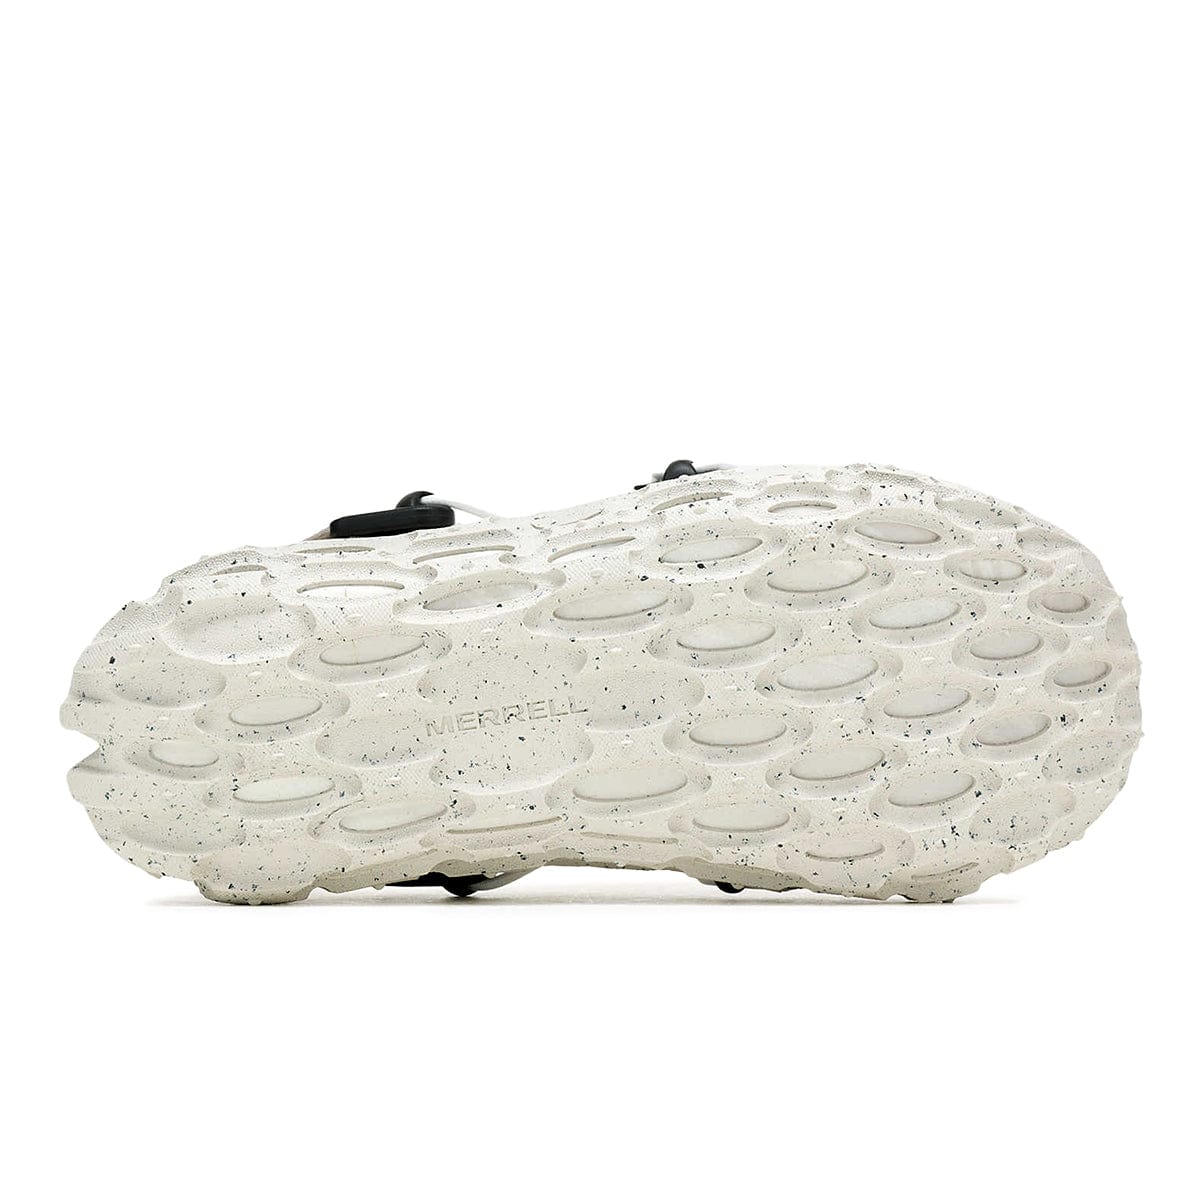 Merrell 1TRL Womens WOMEN'S HYDRO MOC AT CAGE